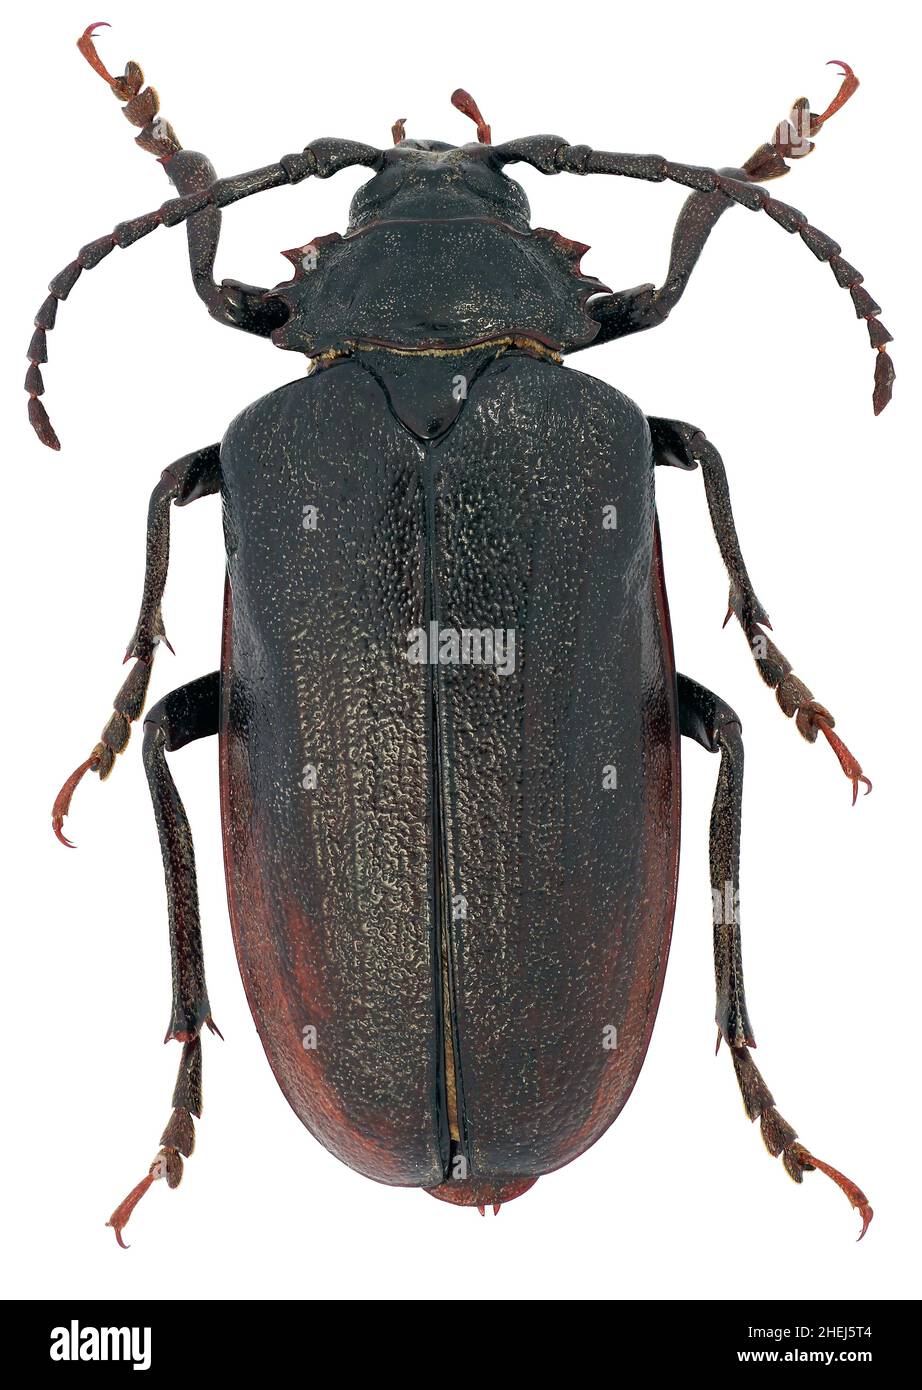 Prionus coriarius sometimes referred to as the tanner or the sawyer is a species of longhorn beetle on a white background Stock Photo